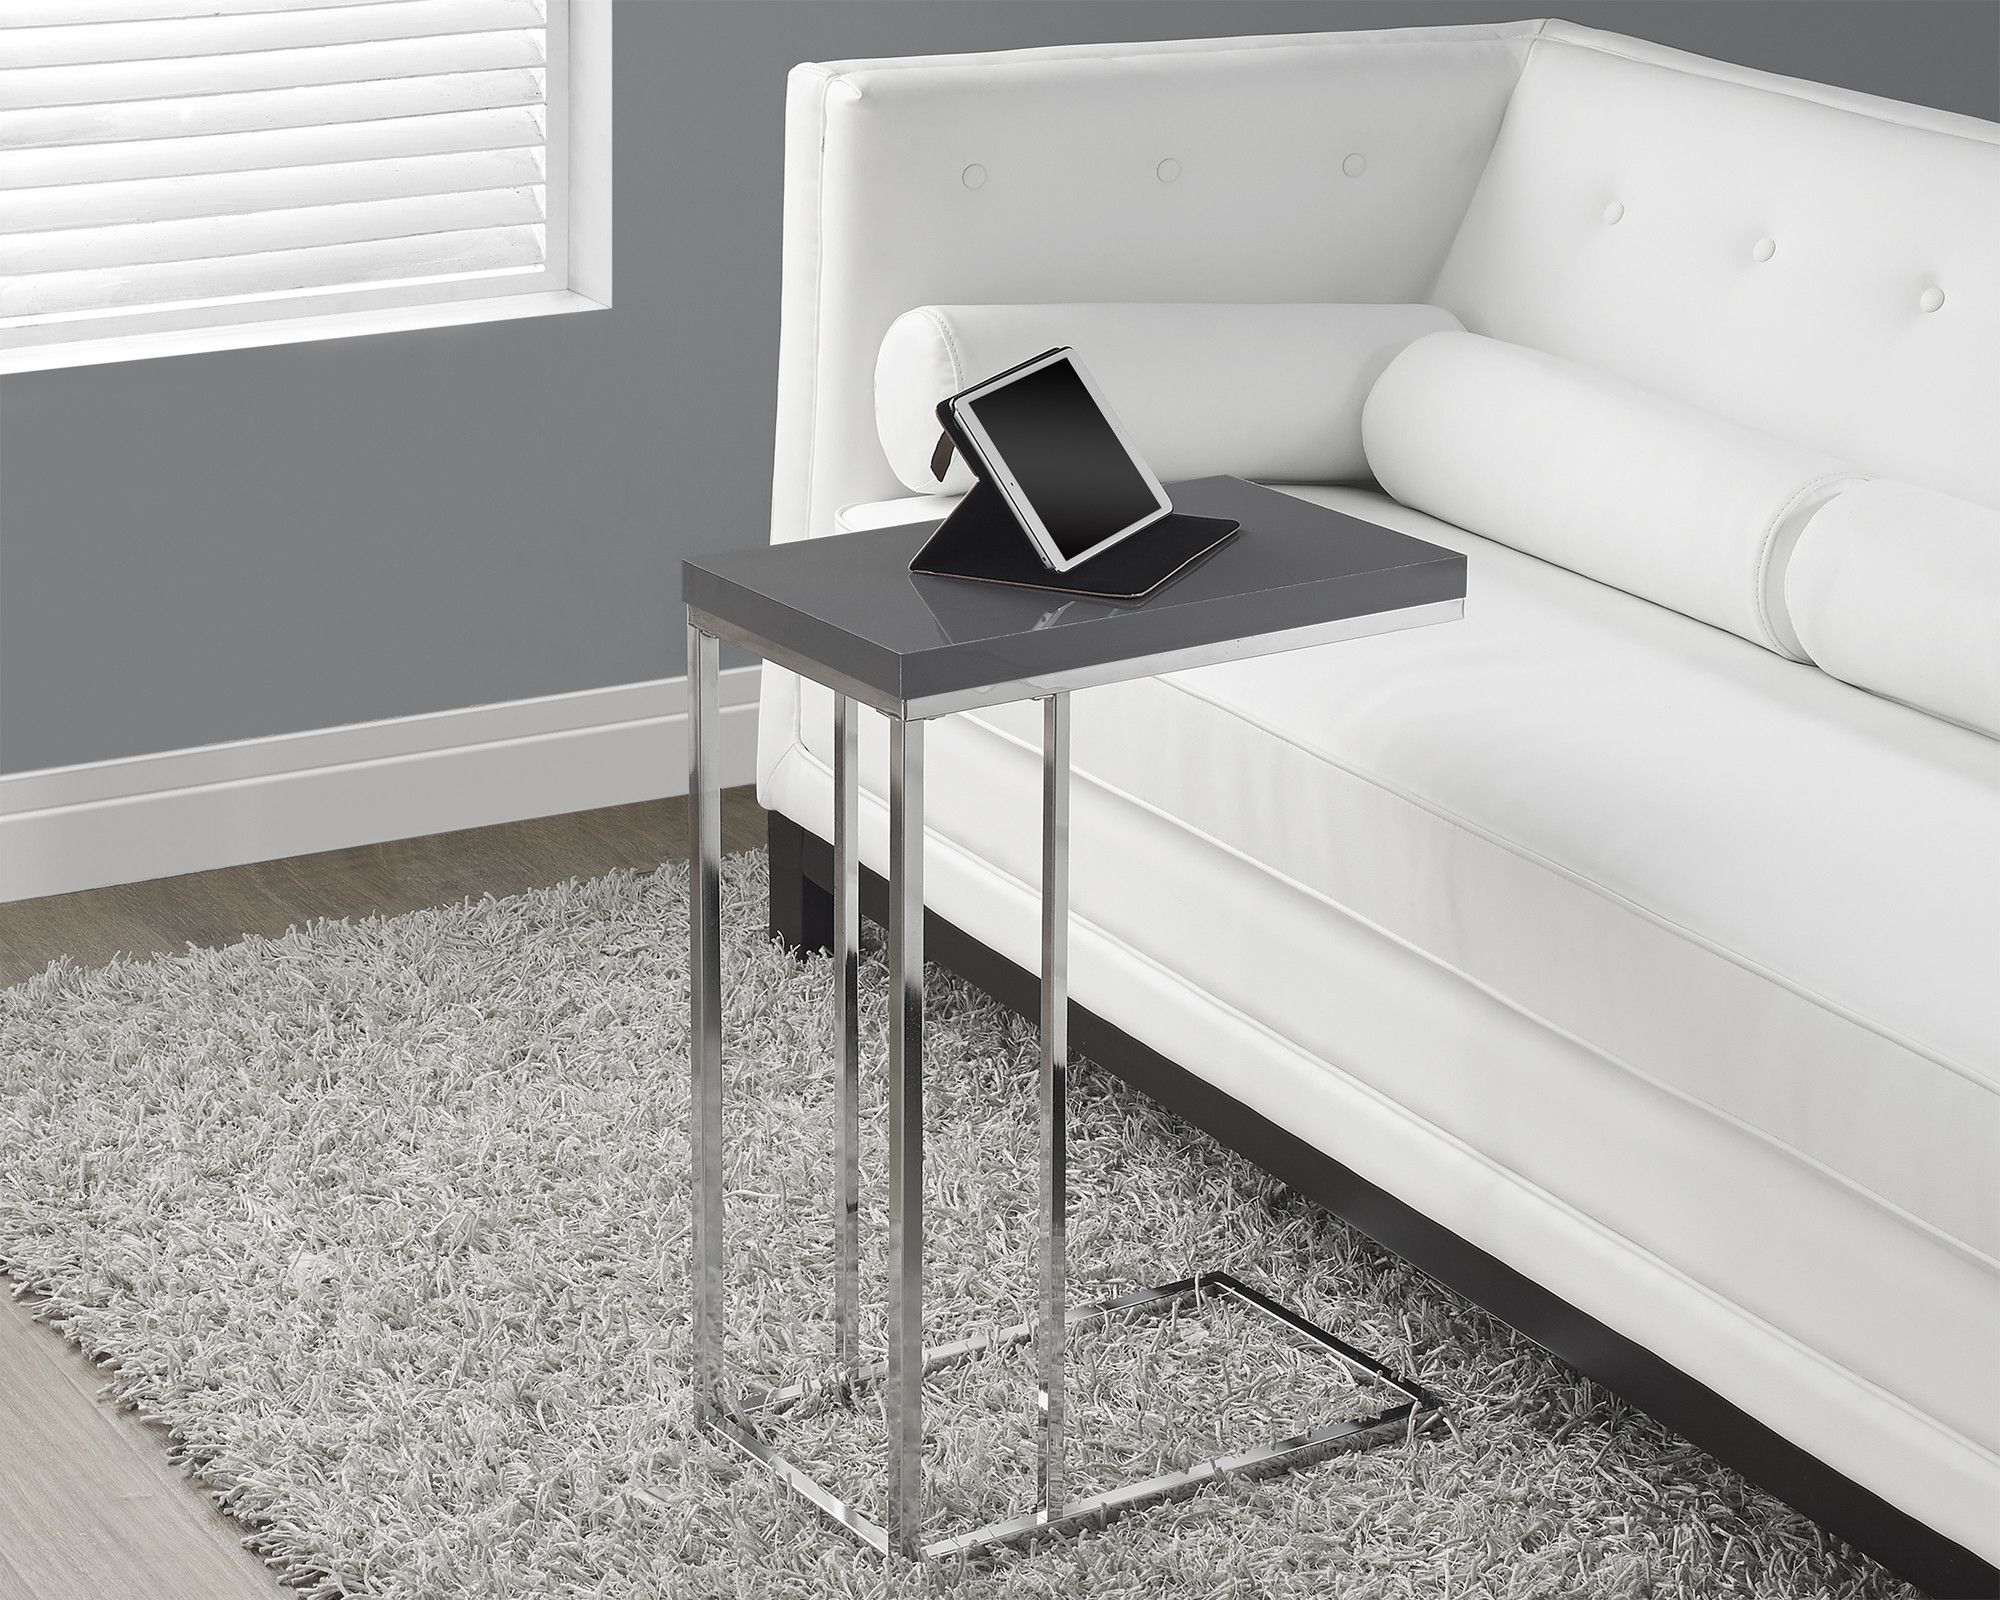 glossy grey hollow core chrome metal accent table products small perfectly tapered that fits independently with any furniture your home this smooth finished has ample surface